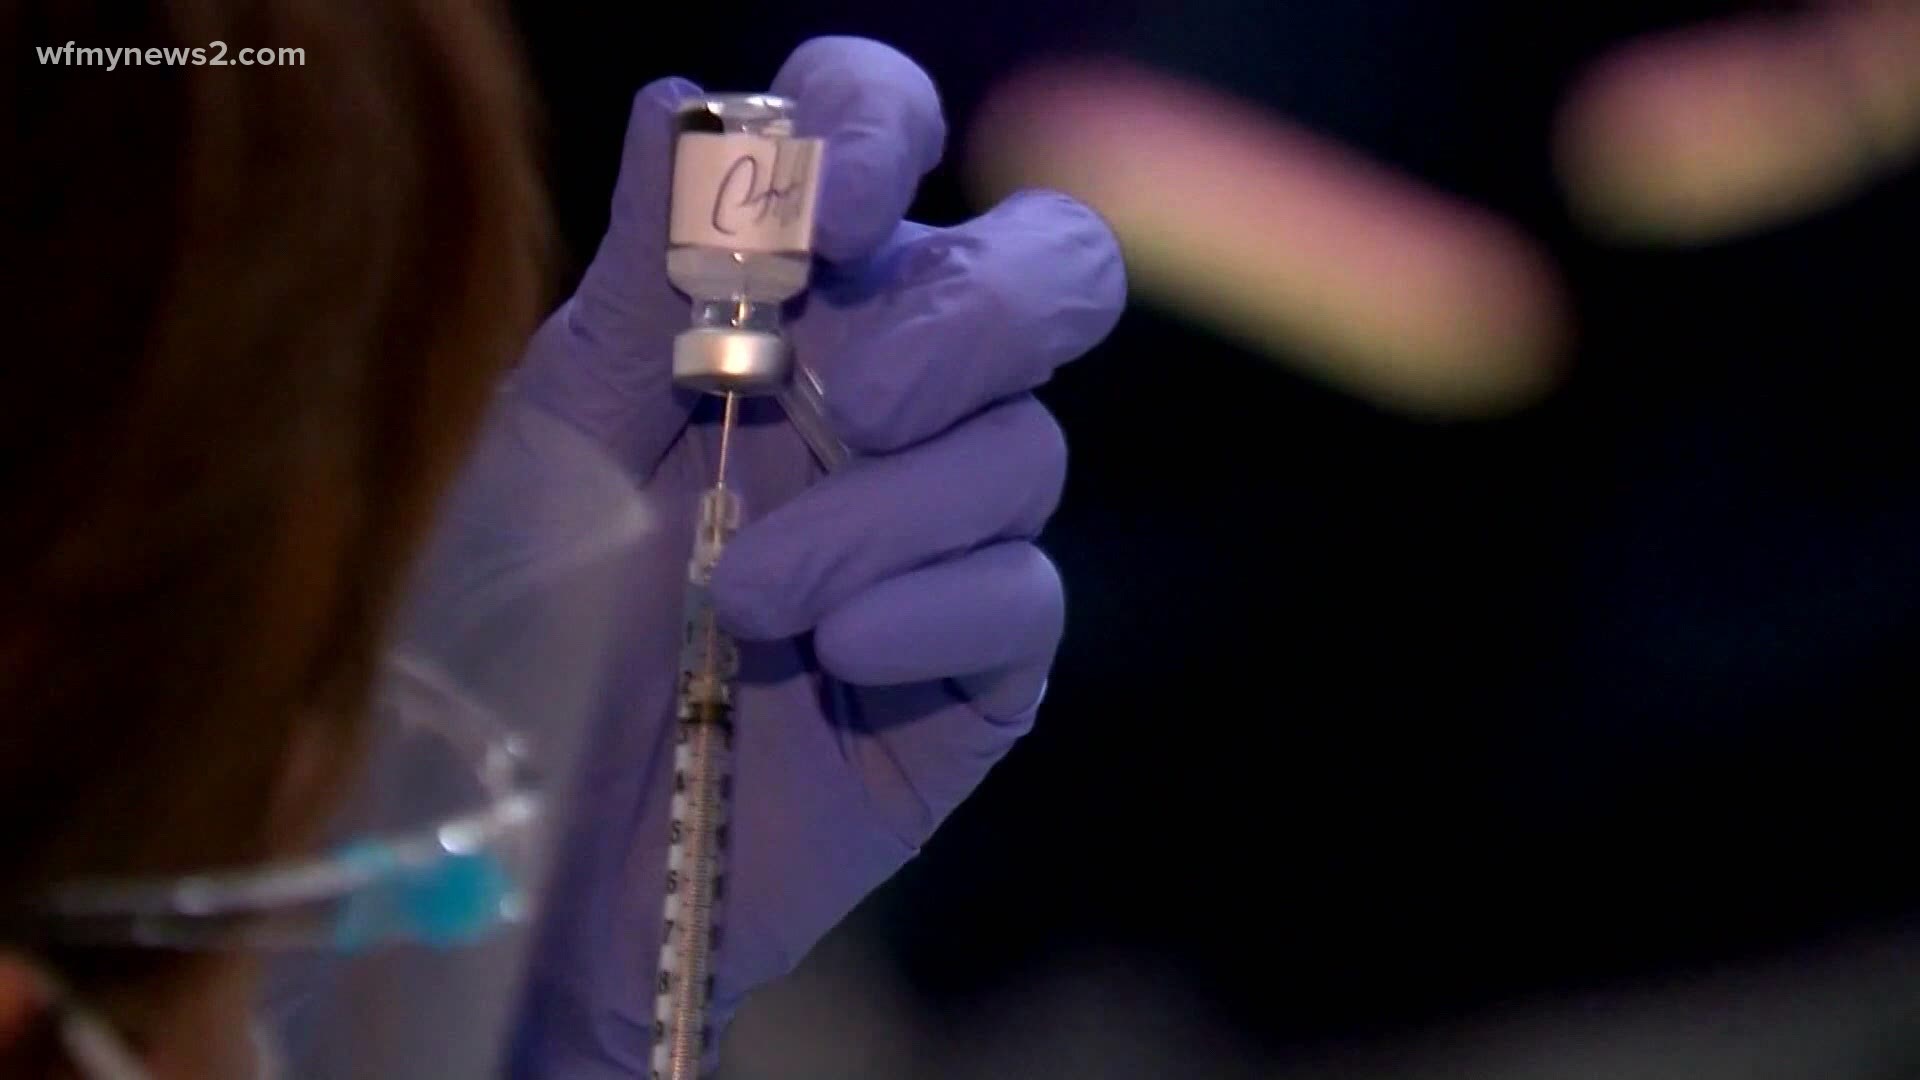 Triad Health officials ask people to get their second dose of a COVID-19 vaccine with the same department they received their first dose.